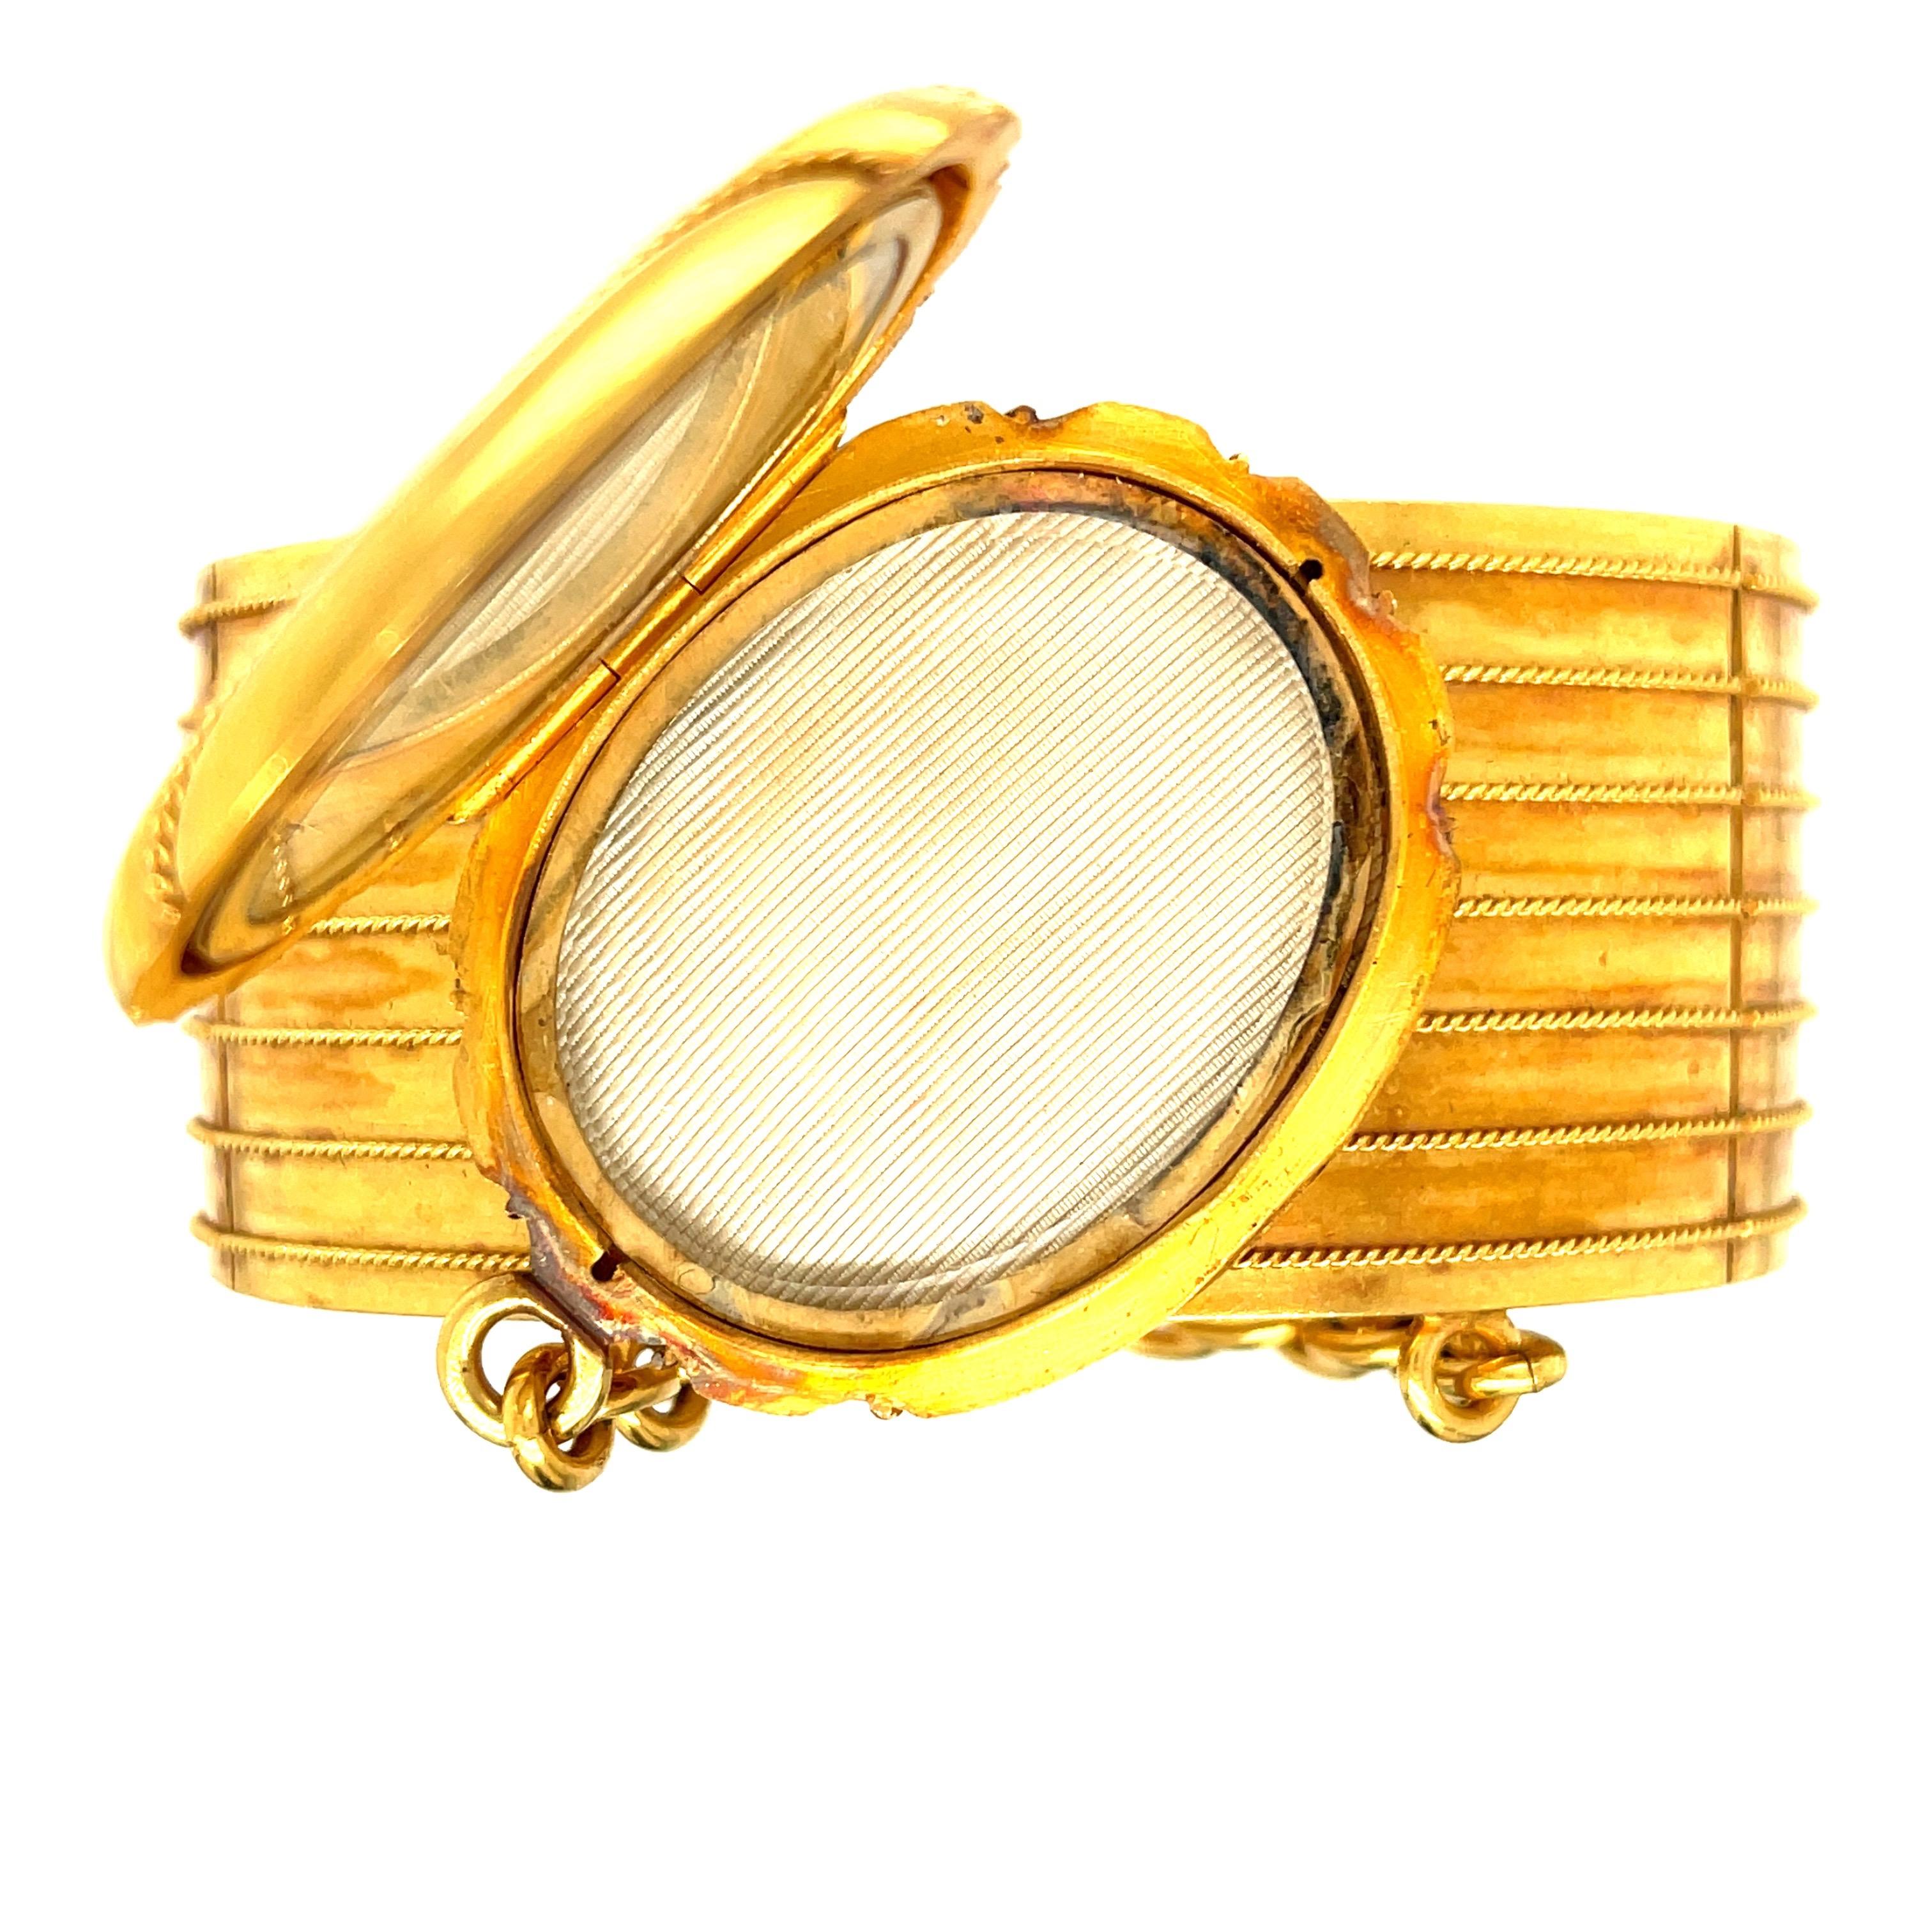 A rare example of a Victorian bangle bracelet with an attached locket, circa 1880. This bracelet is so unusual in its design, but combines two very Victorian loves - gold bangle bracelets and lockets. This wide bangle is made in 18k gold and has